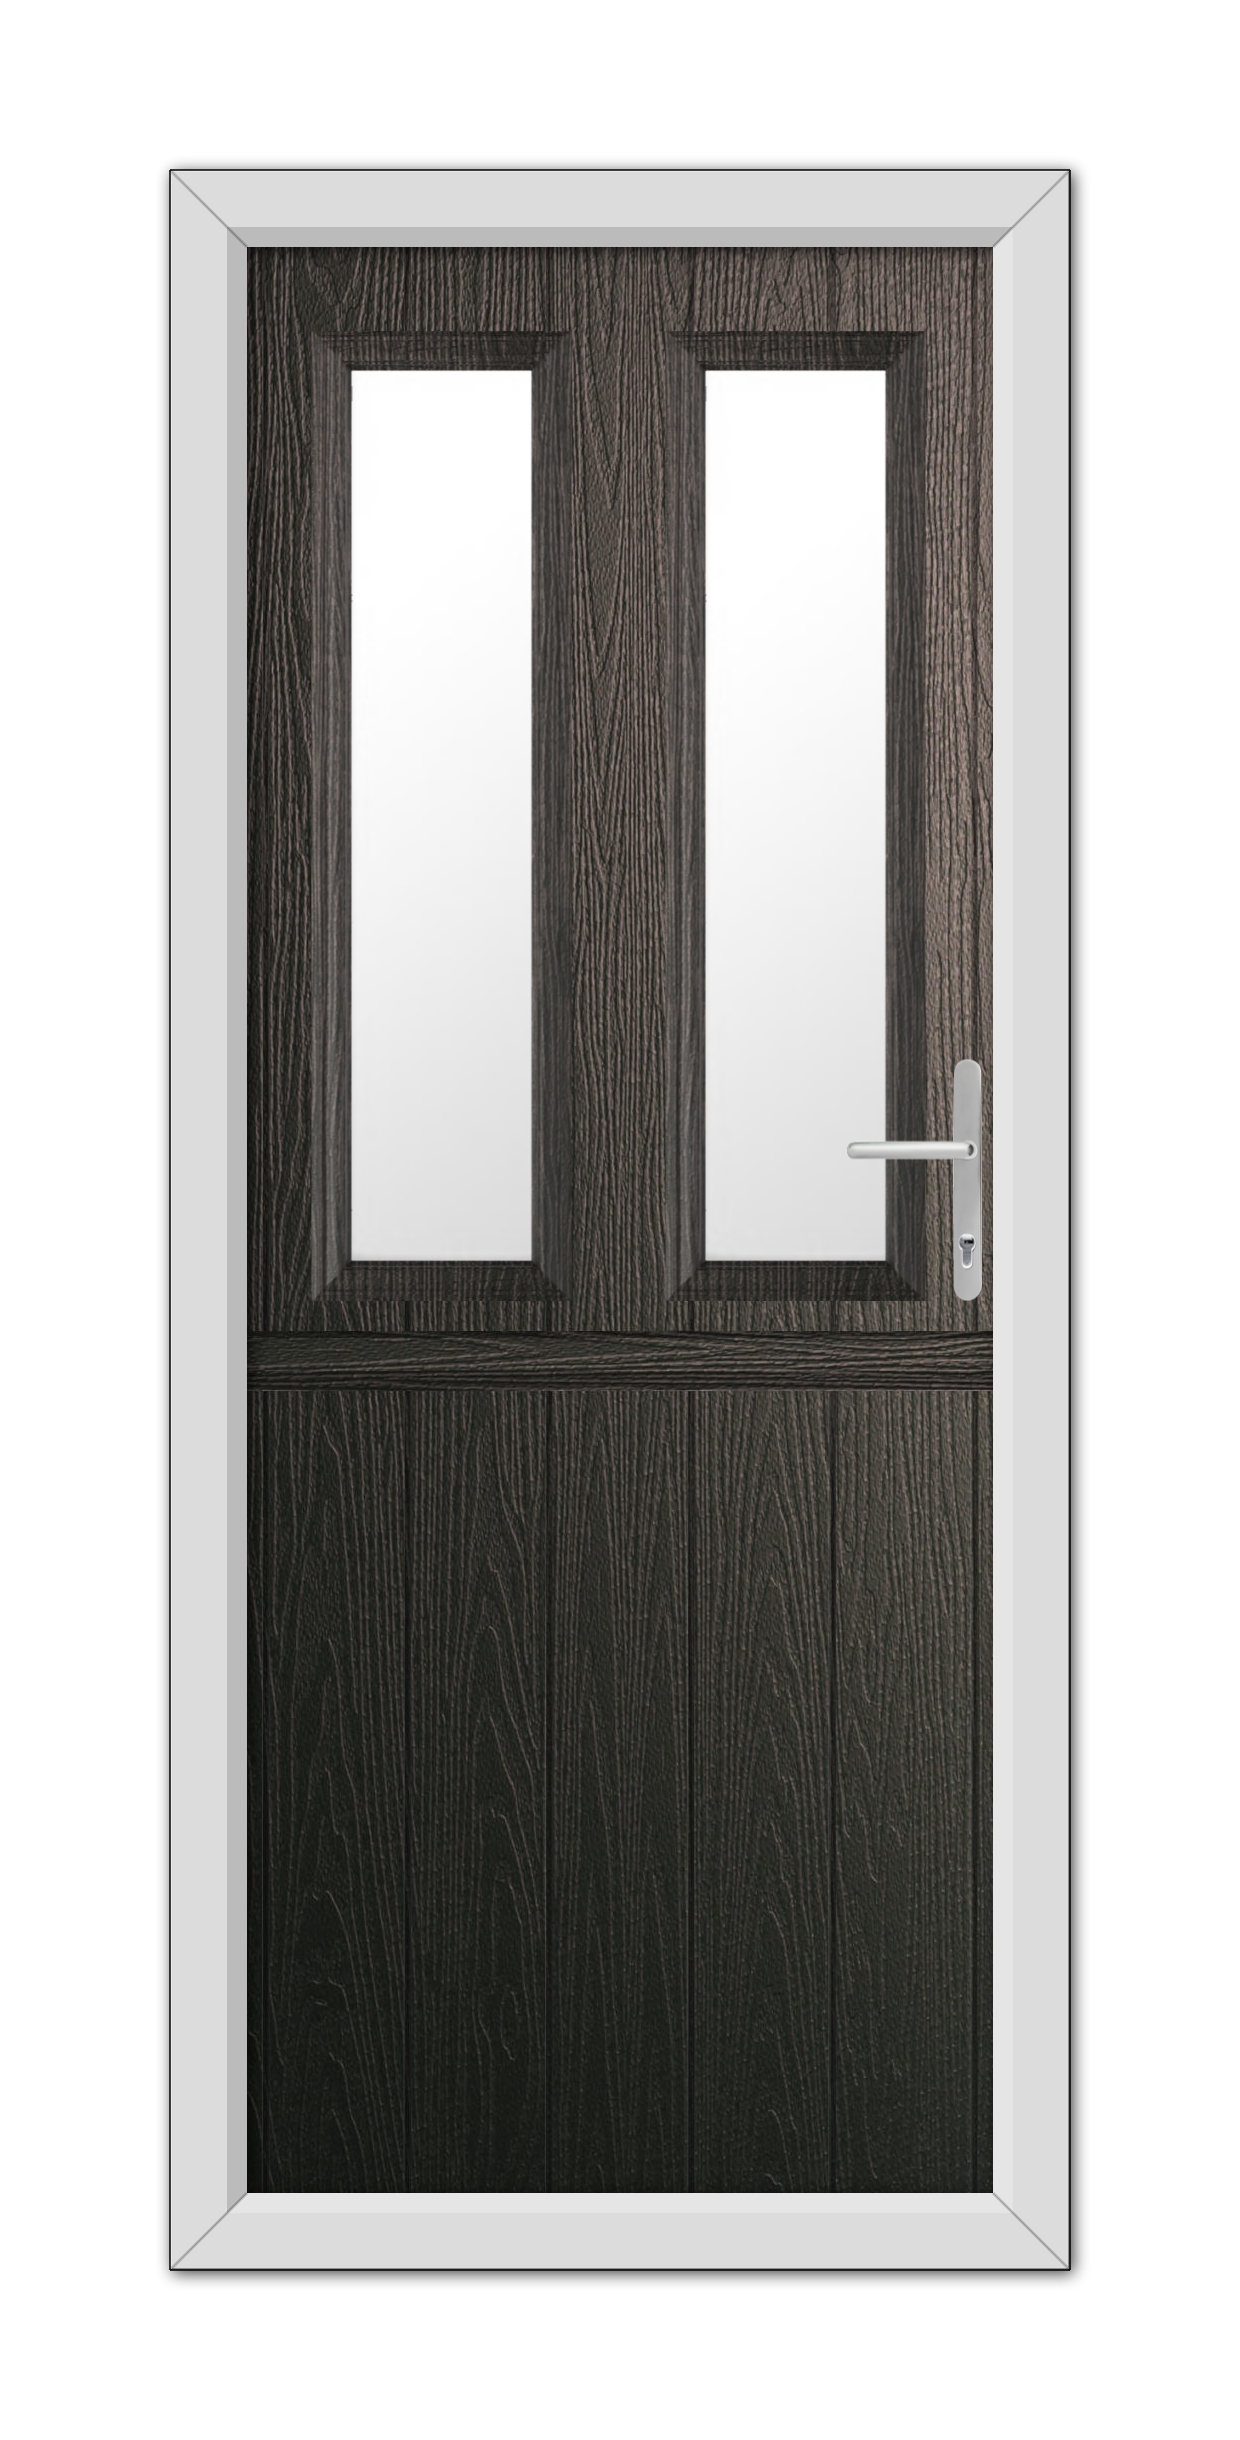 A Schwarzbraun Wellington Stable Composite Door 48mm Timber Core with two vertical glass panels and a metallic handle, framed by a white border.